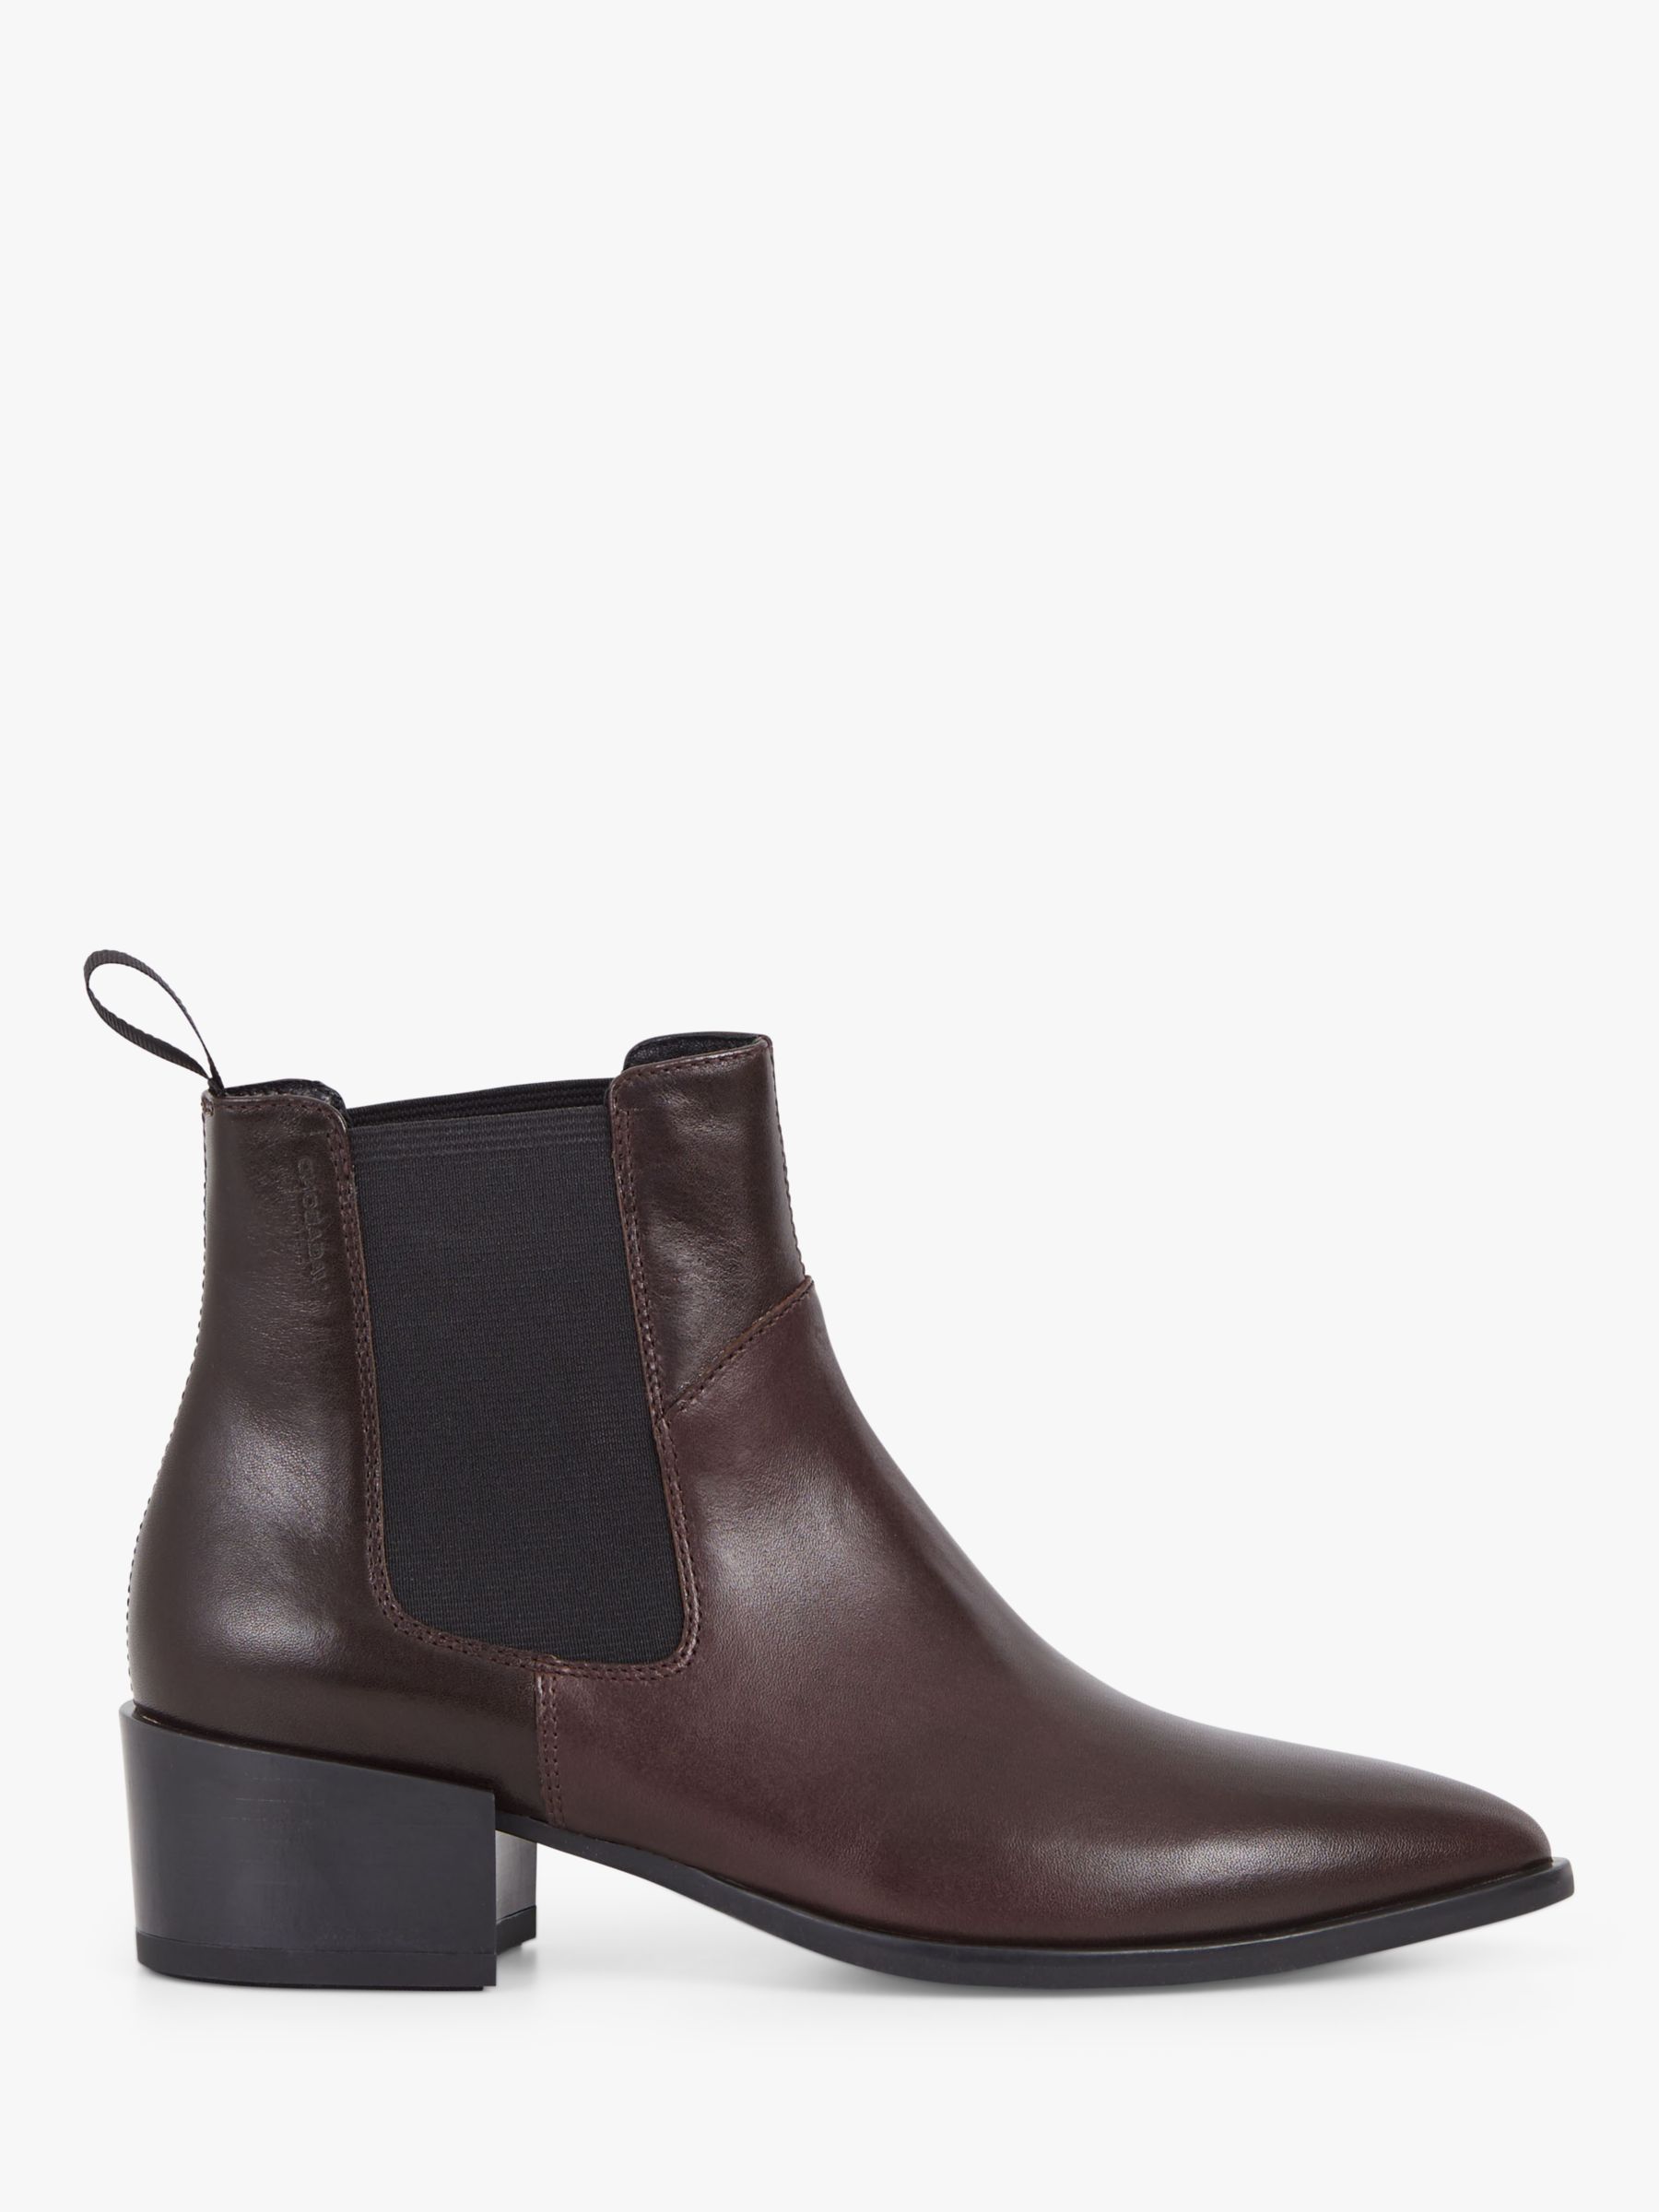 Vagabond Shoemakers Marja Leather Chelsea Boots, Chocolate at John ...